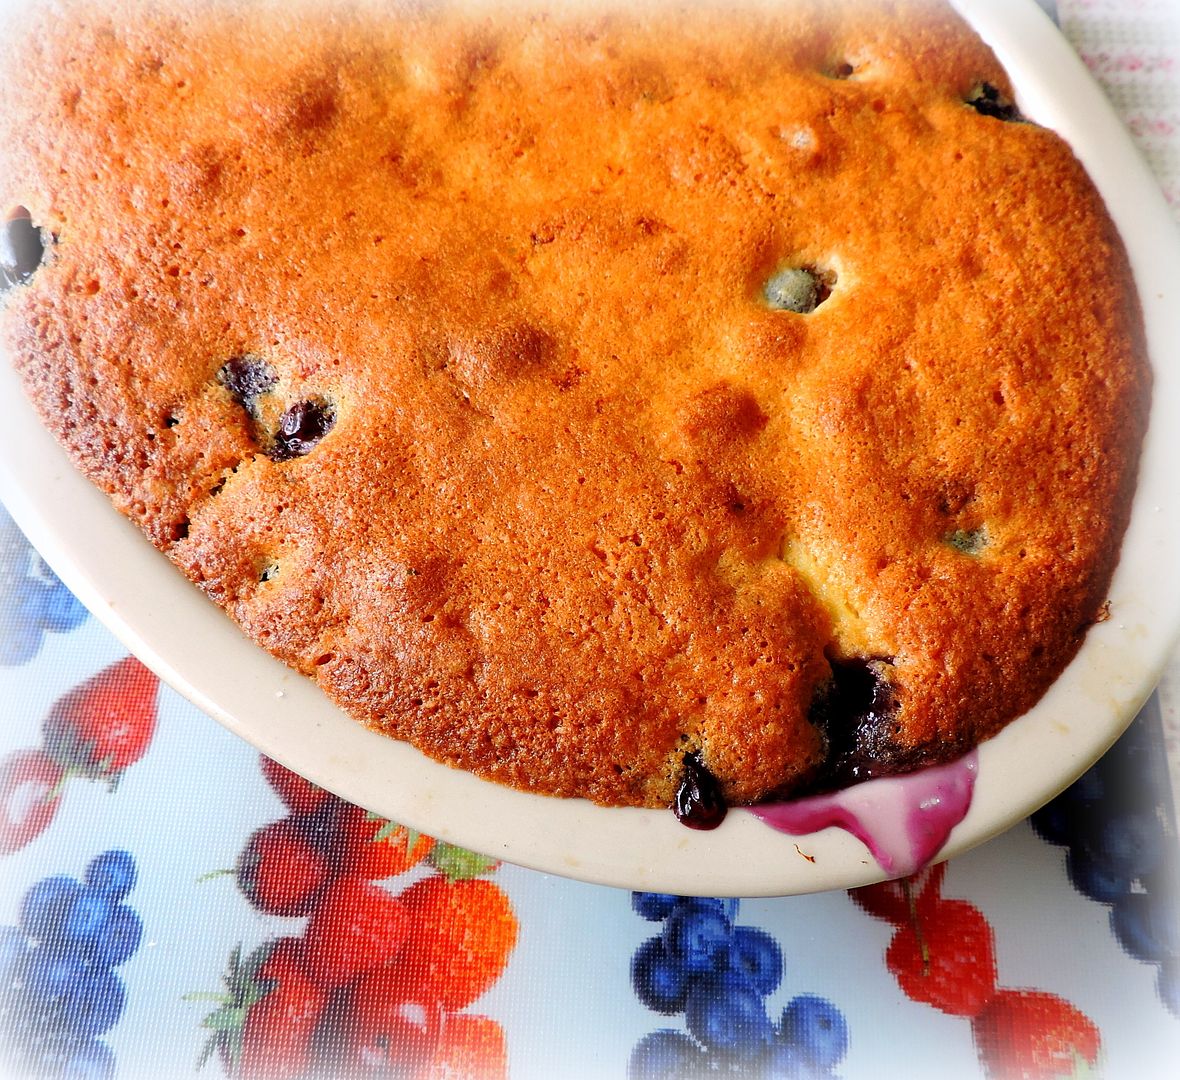 Apple & Blueberry Eve's Pudding